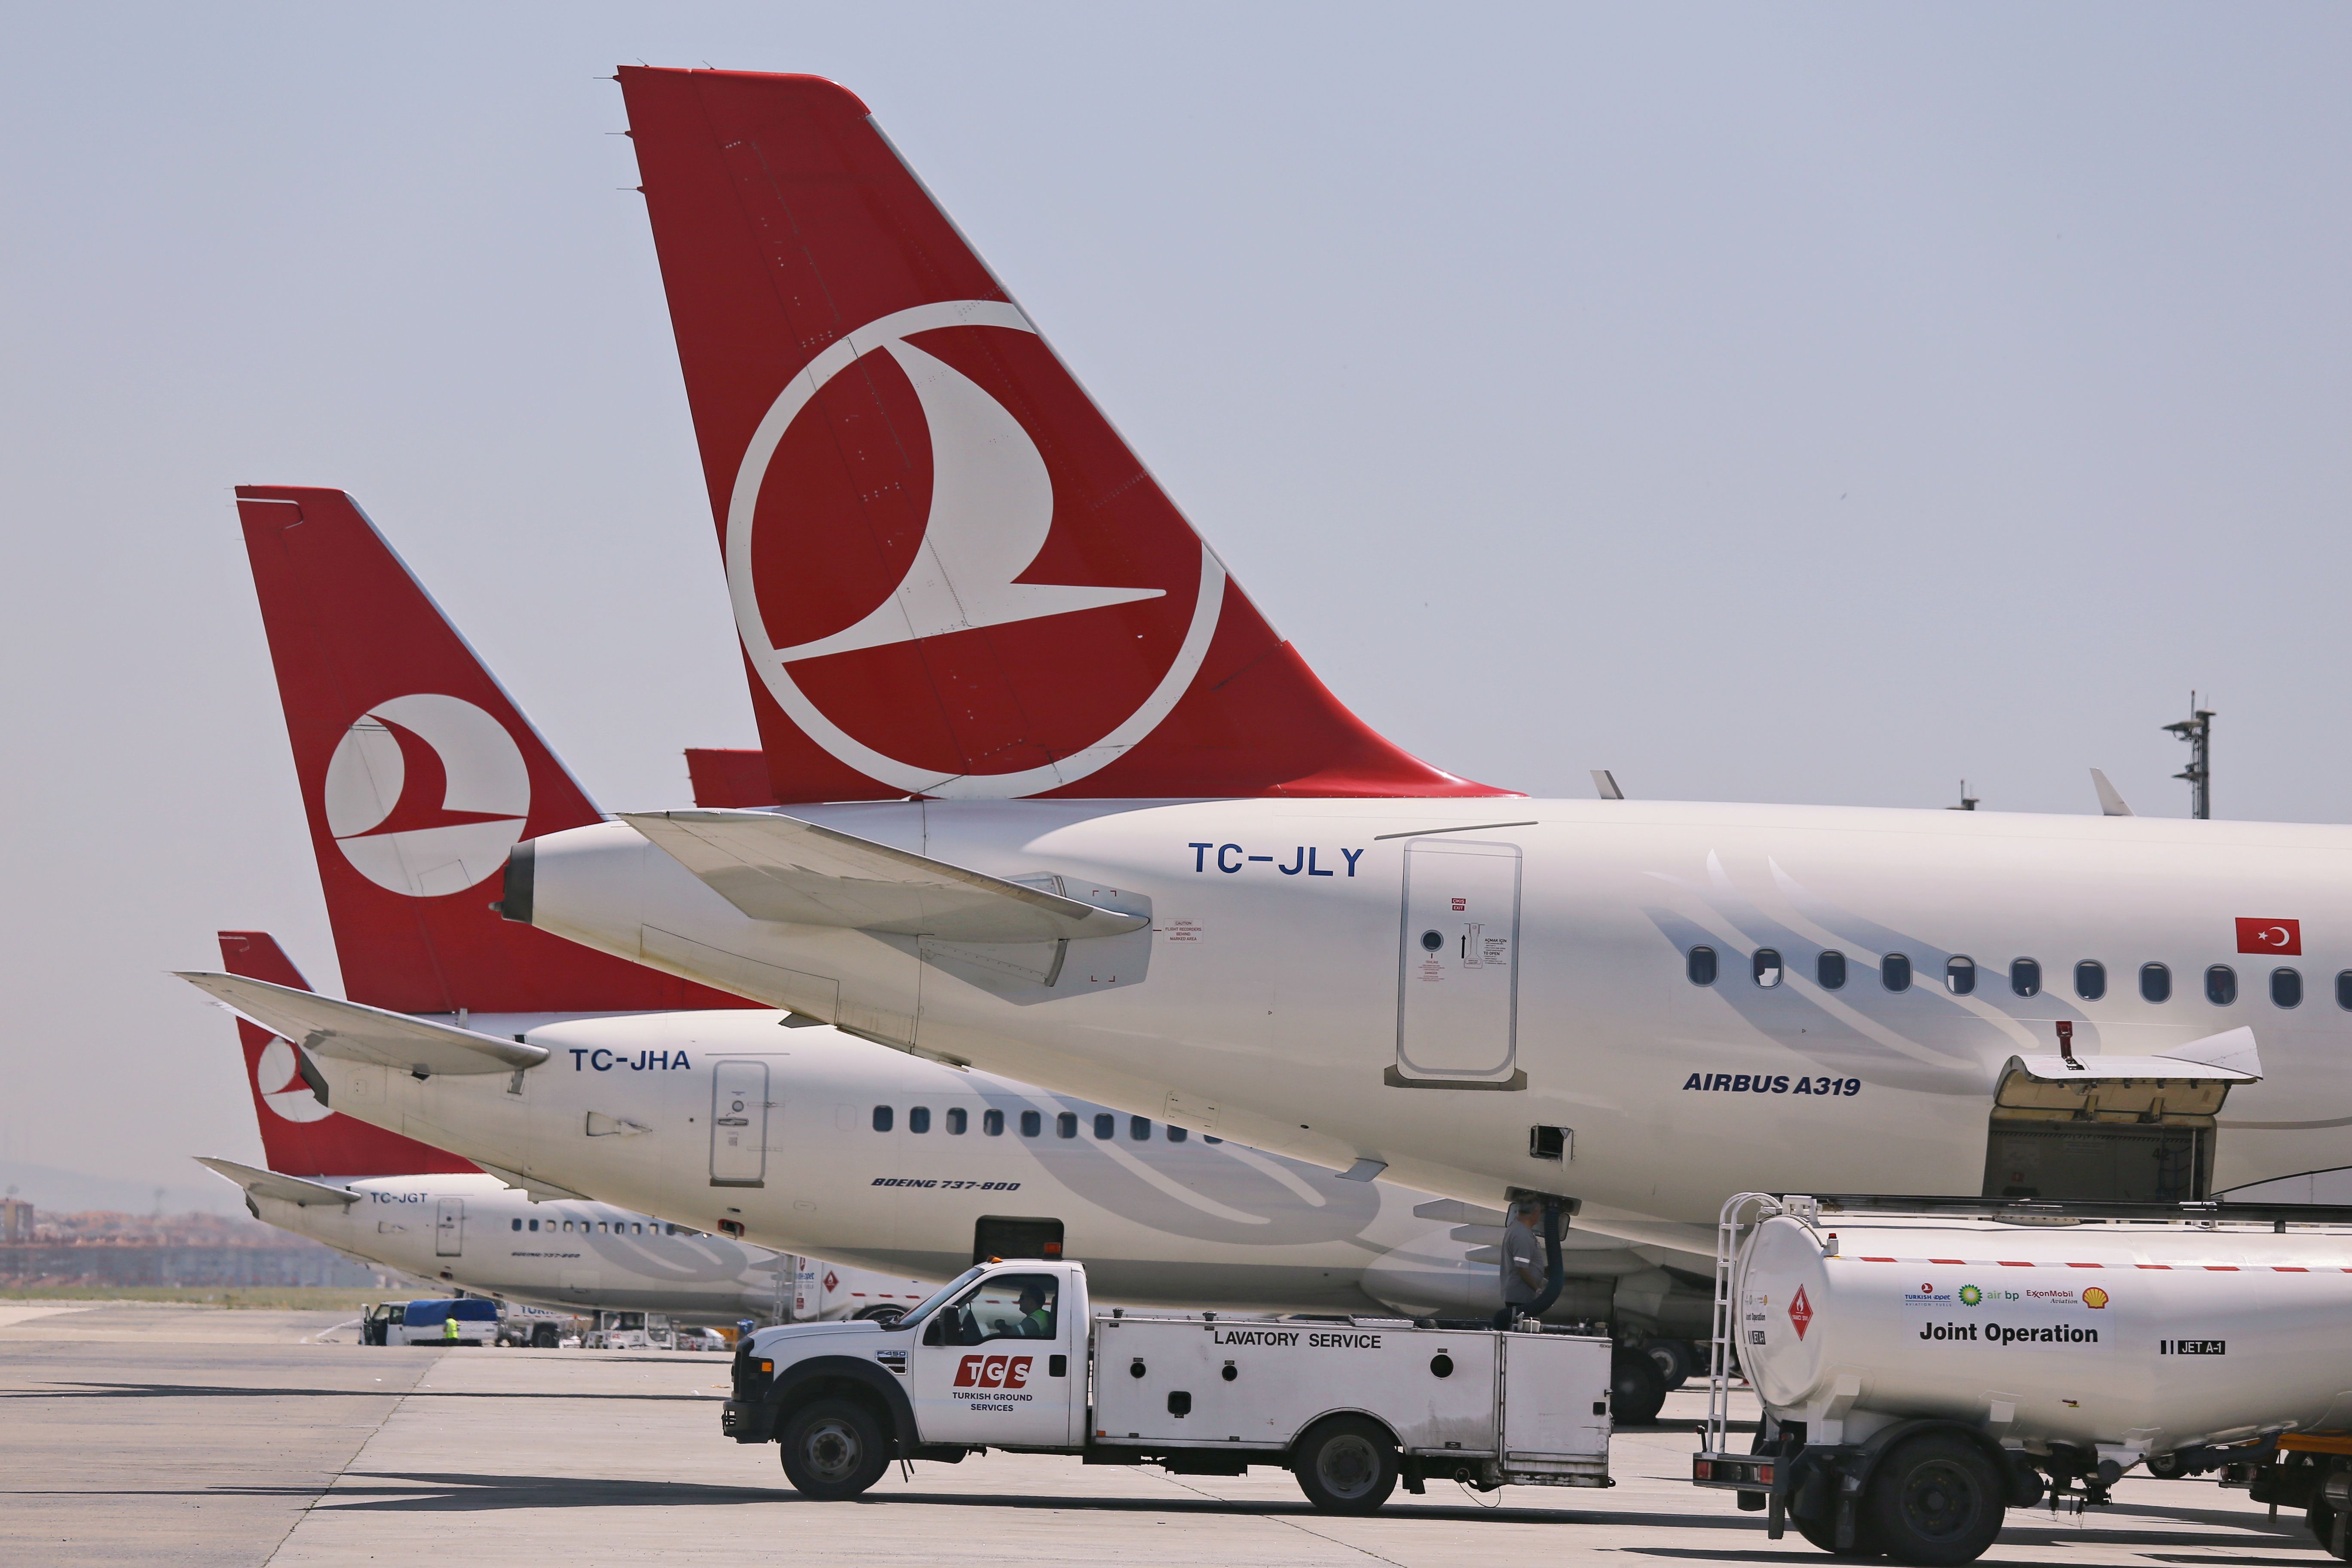 Turkish Airlines aircraft tails 